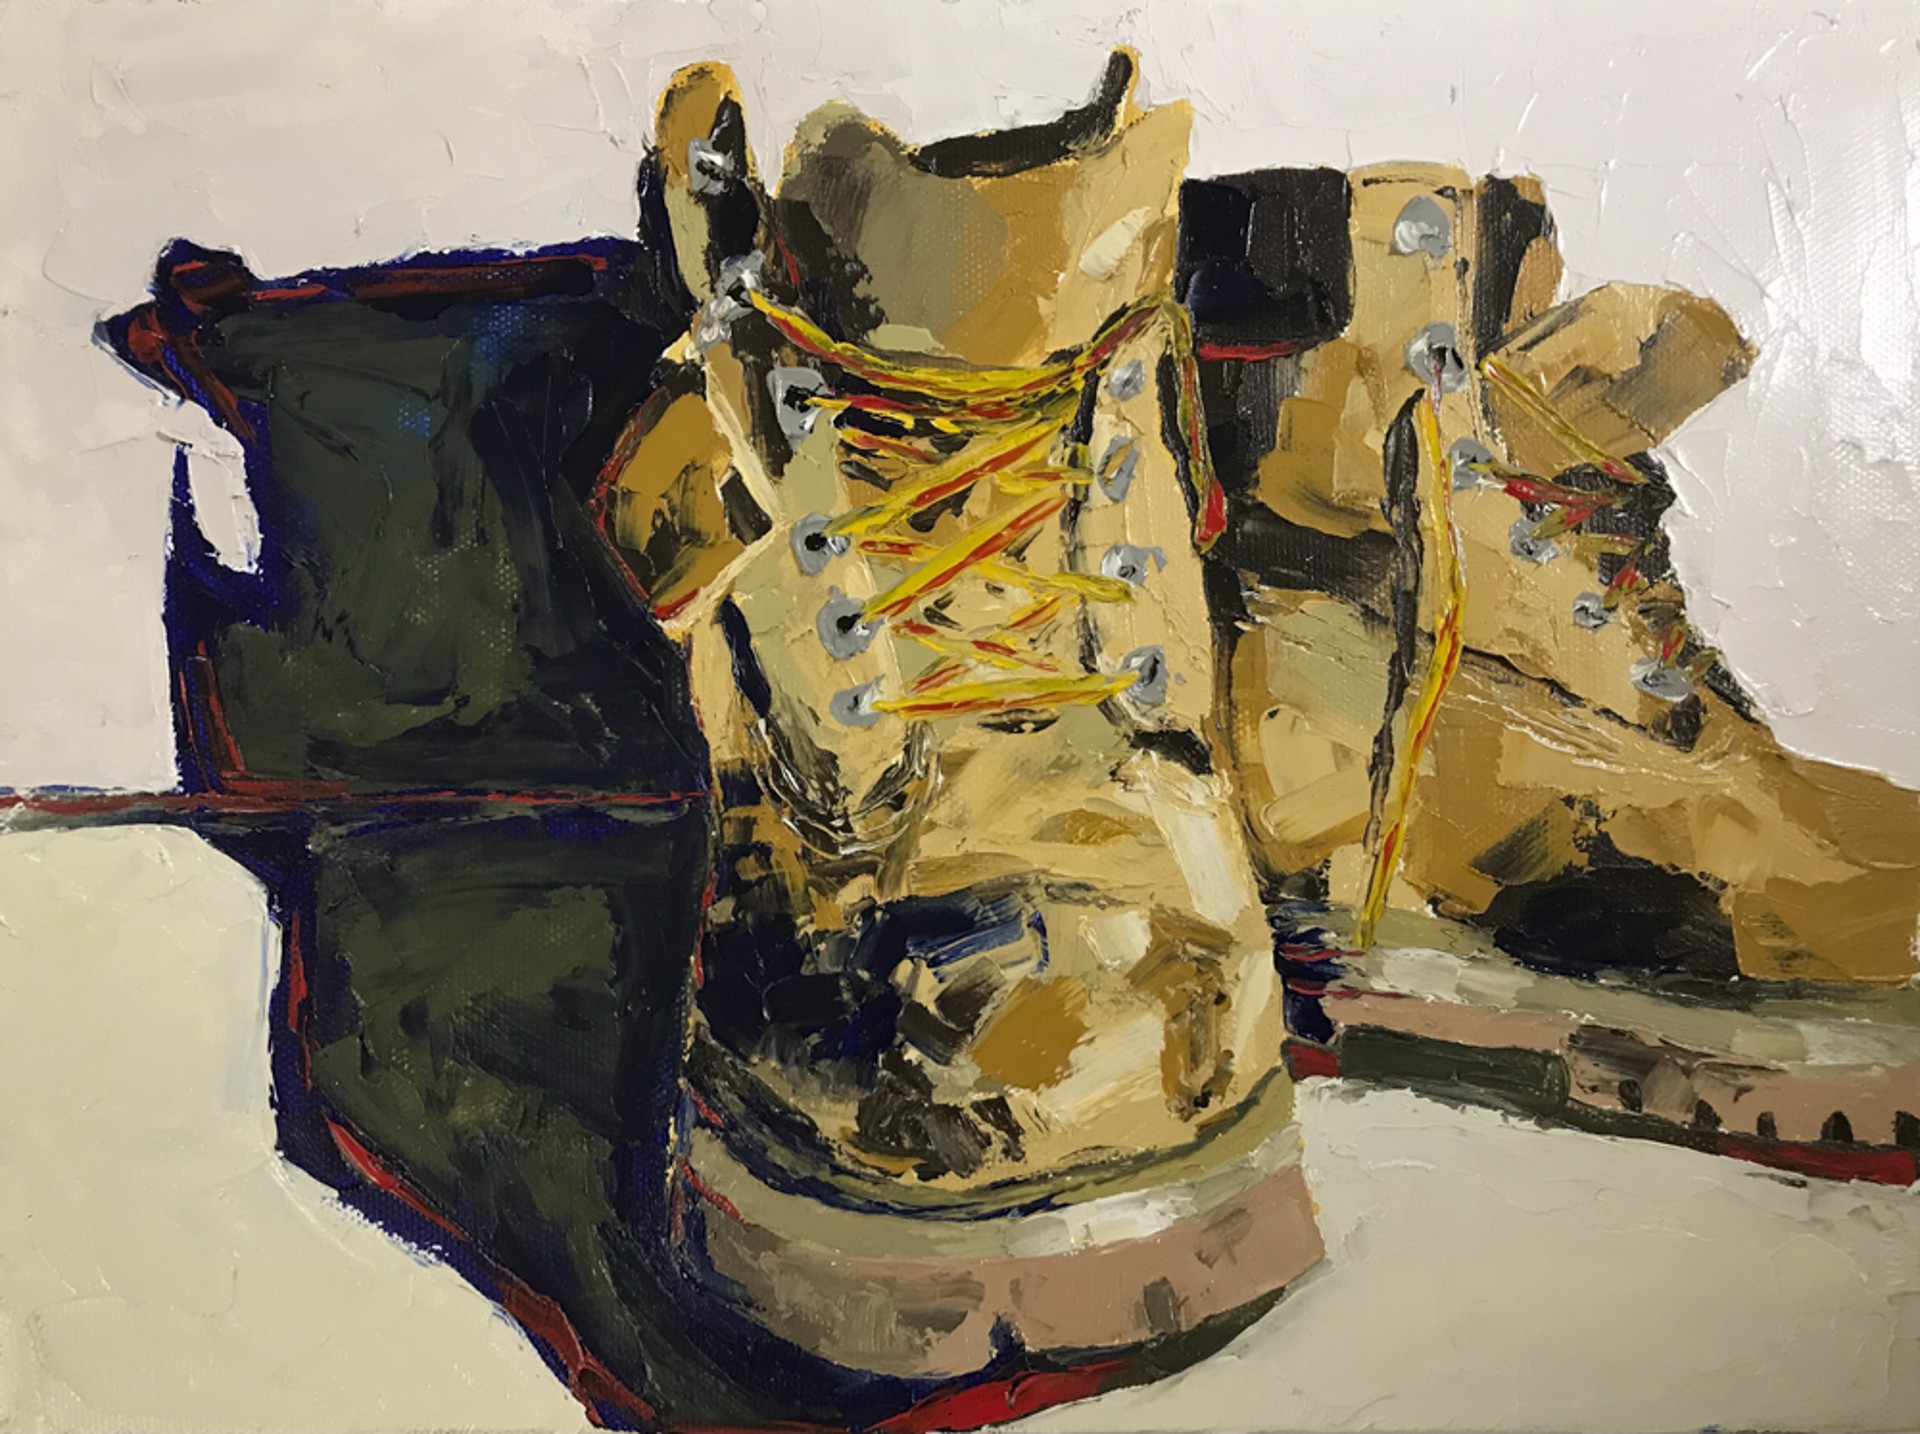 My Boots by Calvin Mohler